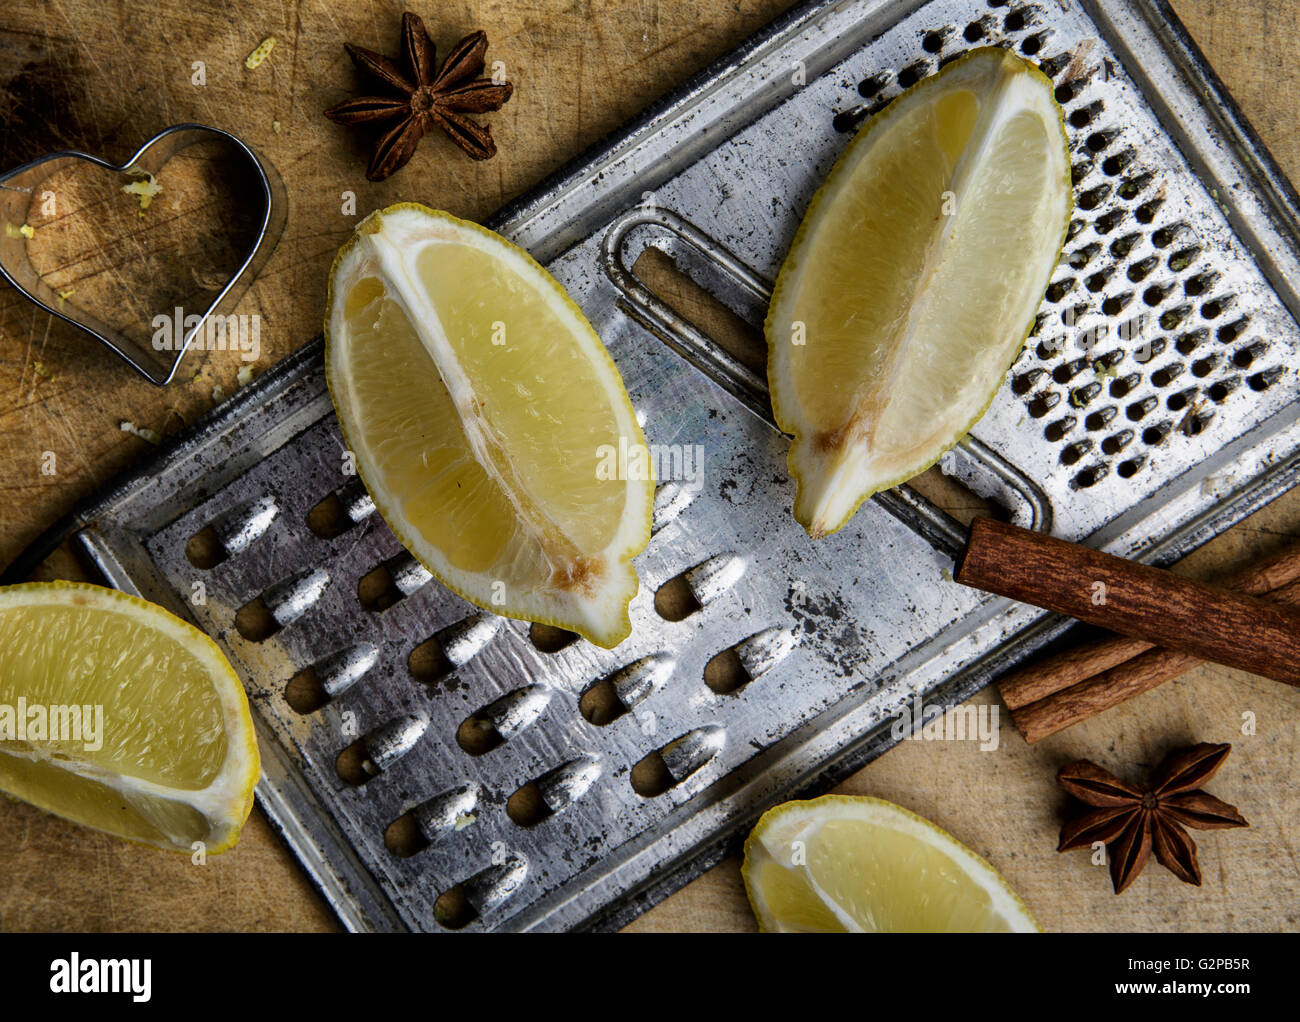 Fresh Lemon with metal grater on blue board Stock Photo